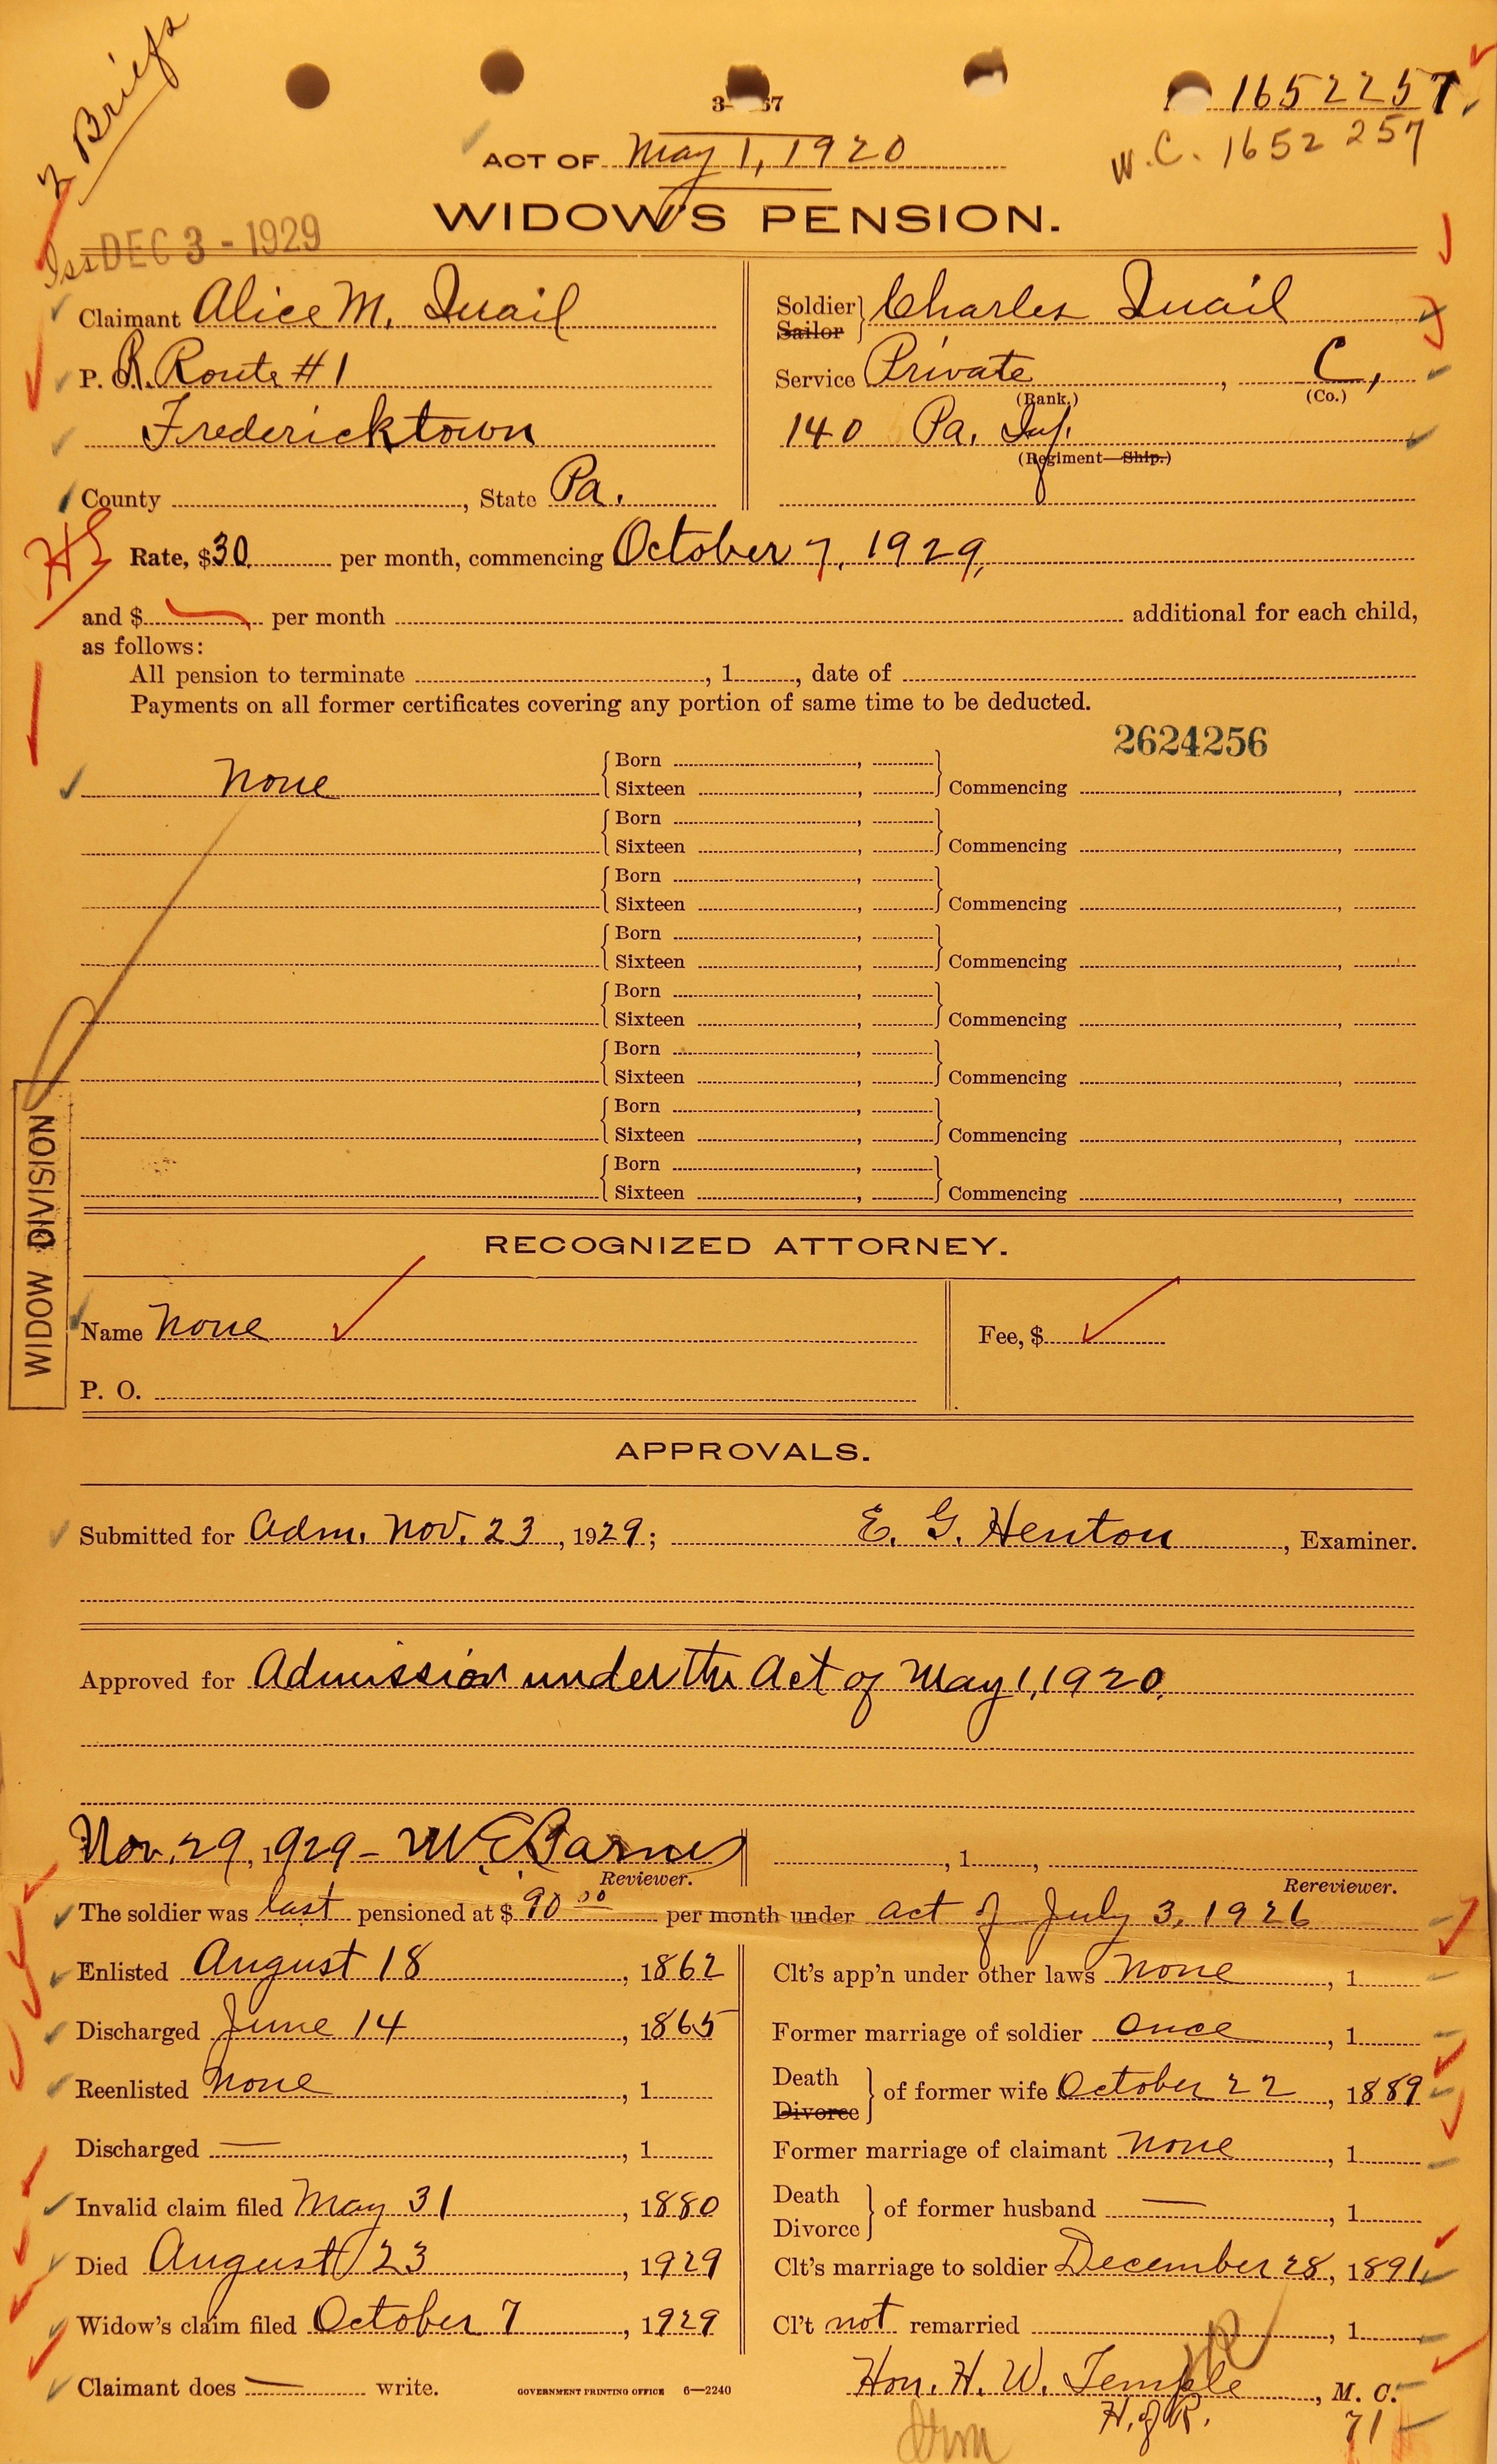 Ruling granting a widow's pension under the act of May 1, 1920